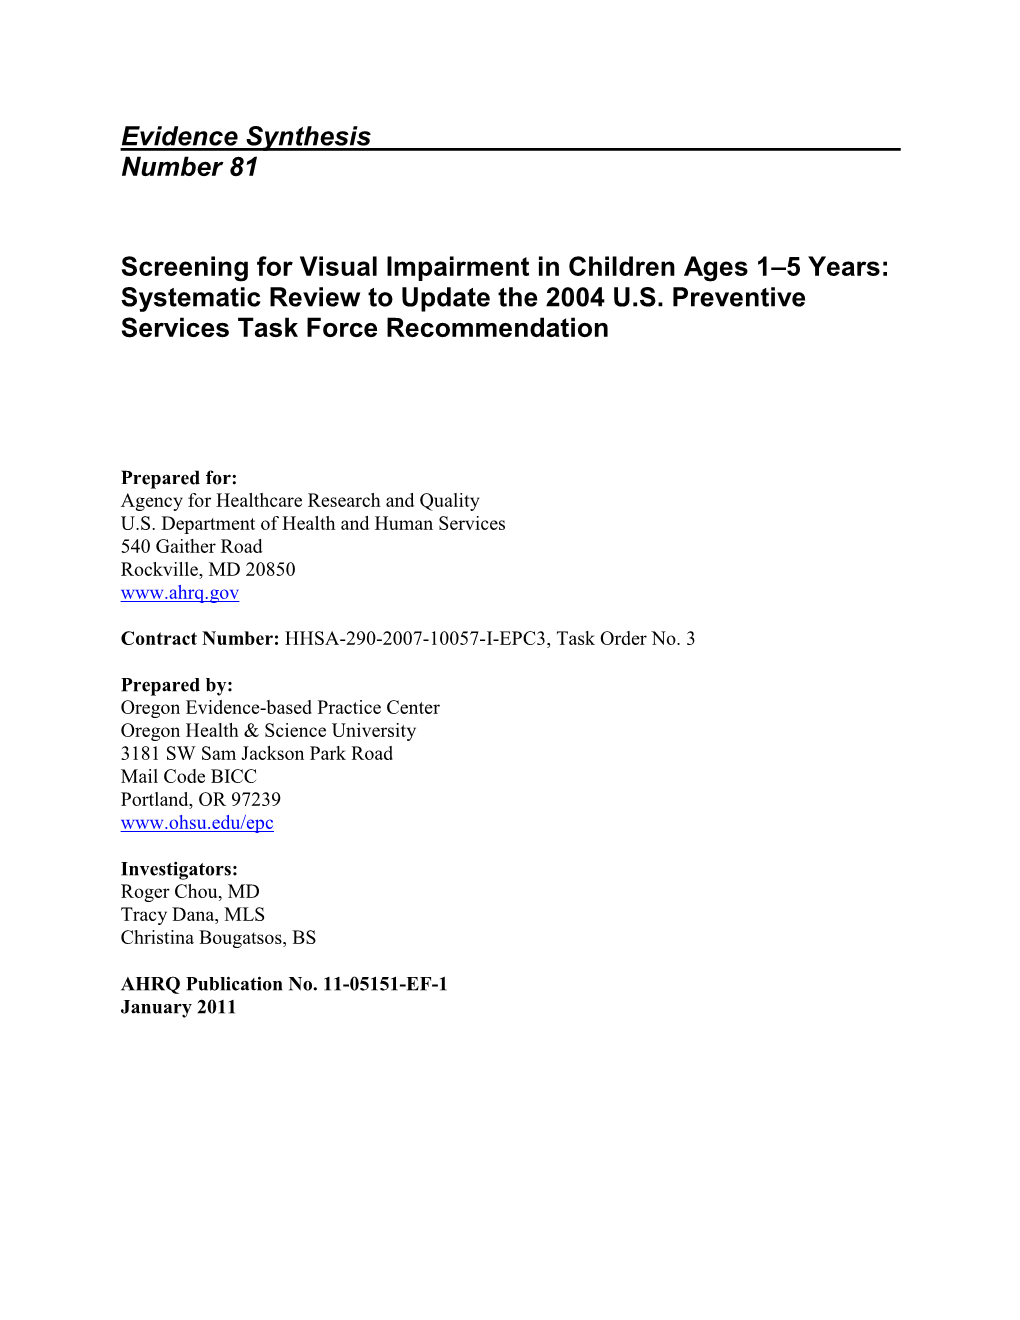 Screening for Visual Impairment in Children Ages 1–5 Years: Systematic Review to Update the 2004 U.S